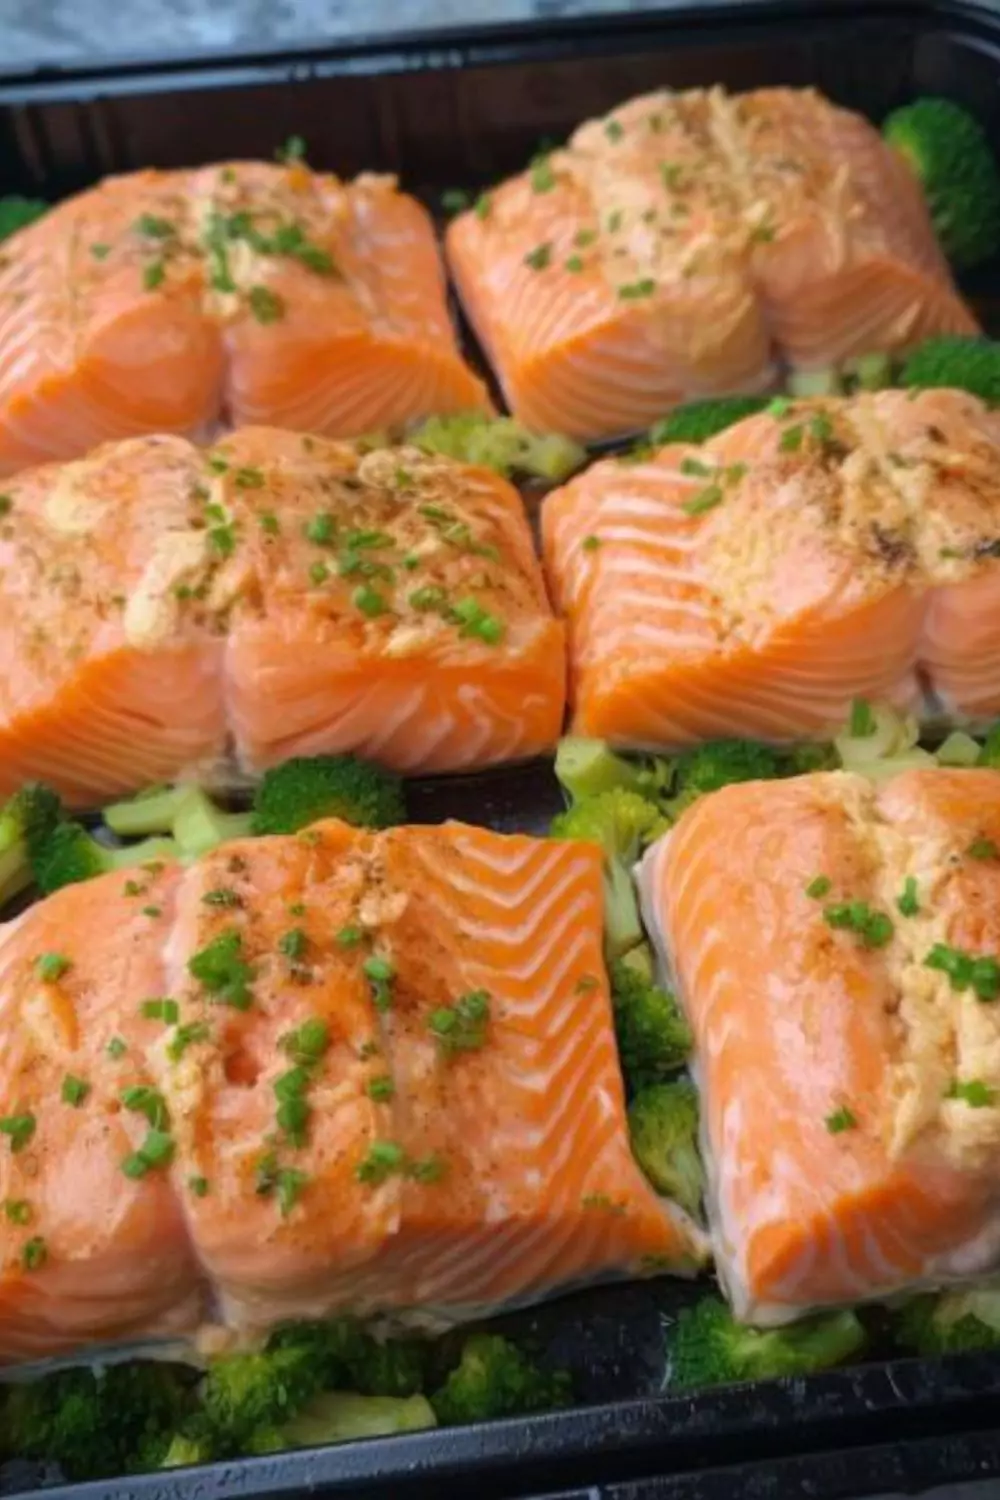 Costco Salmon Cooking Instructions